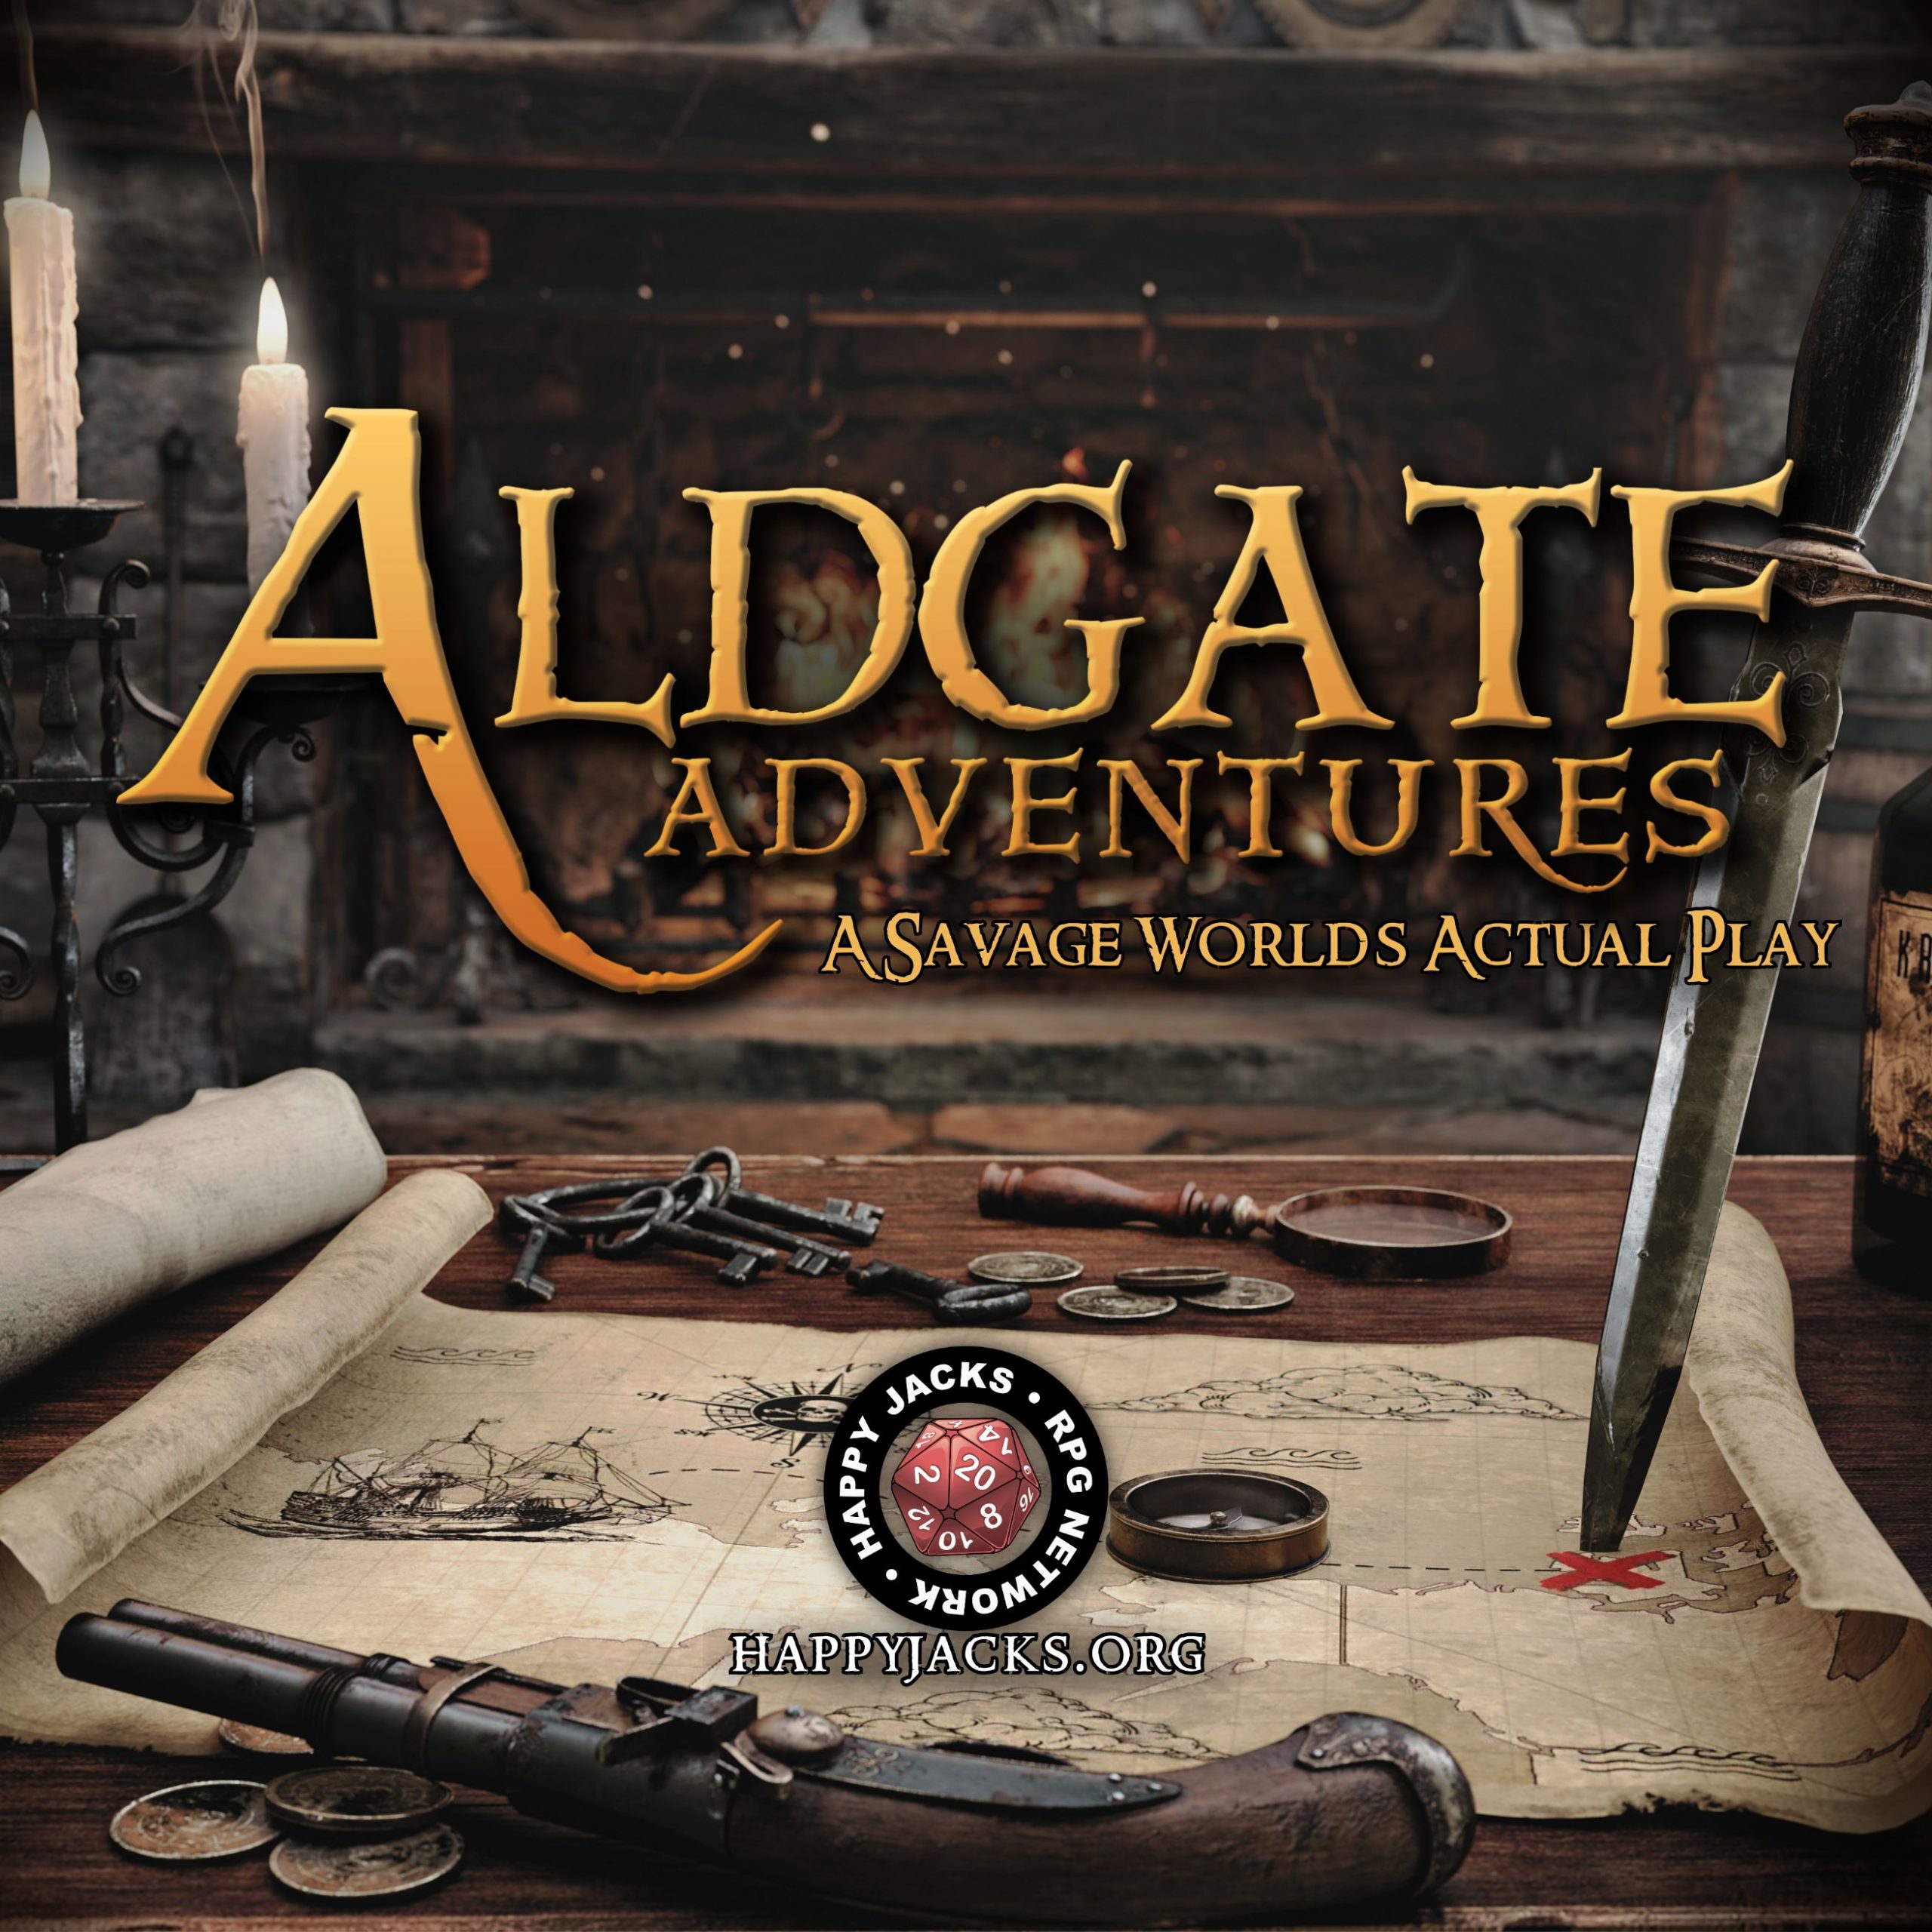 ALDGATE01 In these Shoes? | Aldgate Adventures | Savage Worlds